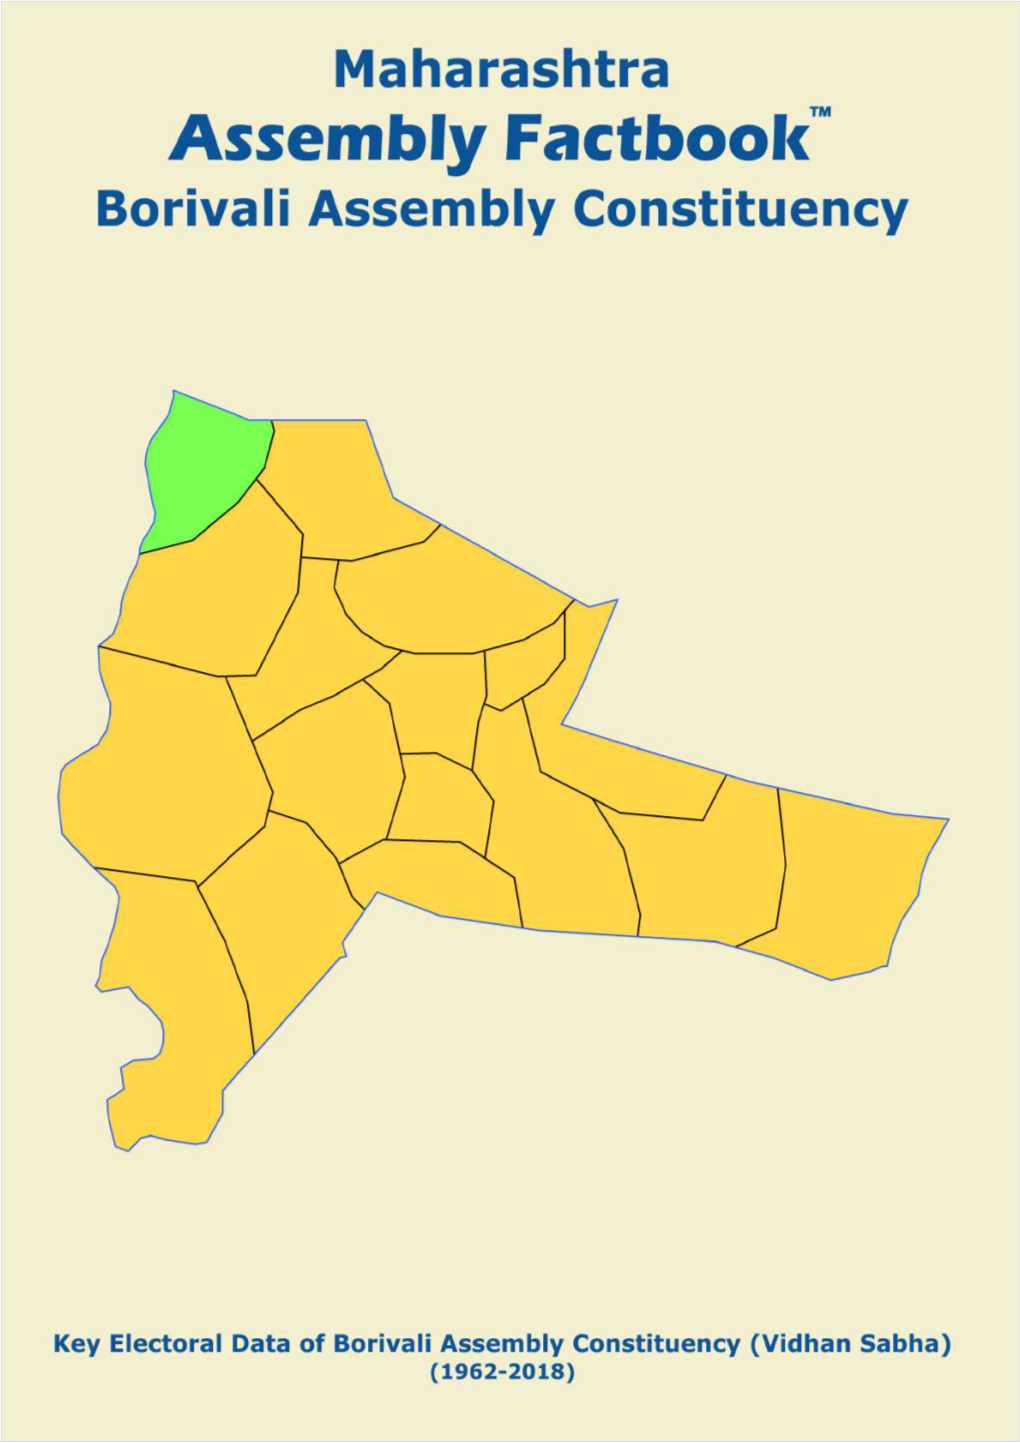 Key Electoral Data of Borivali Assembly Constituency